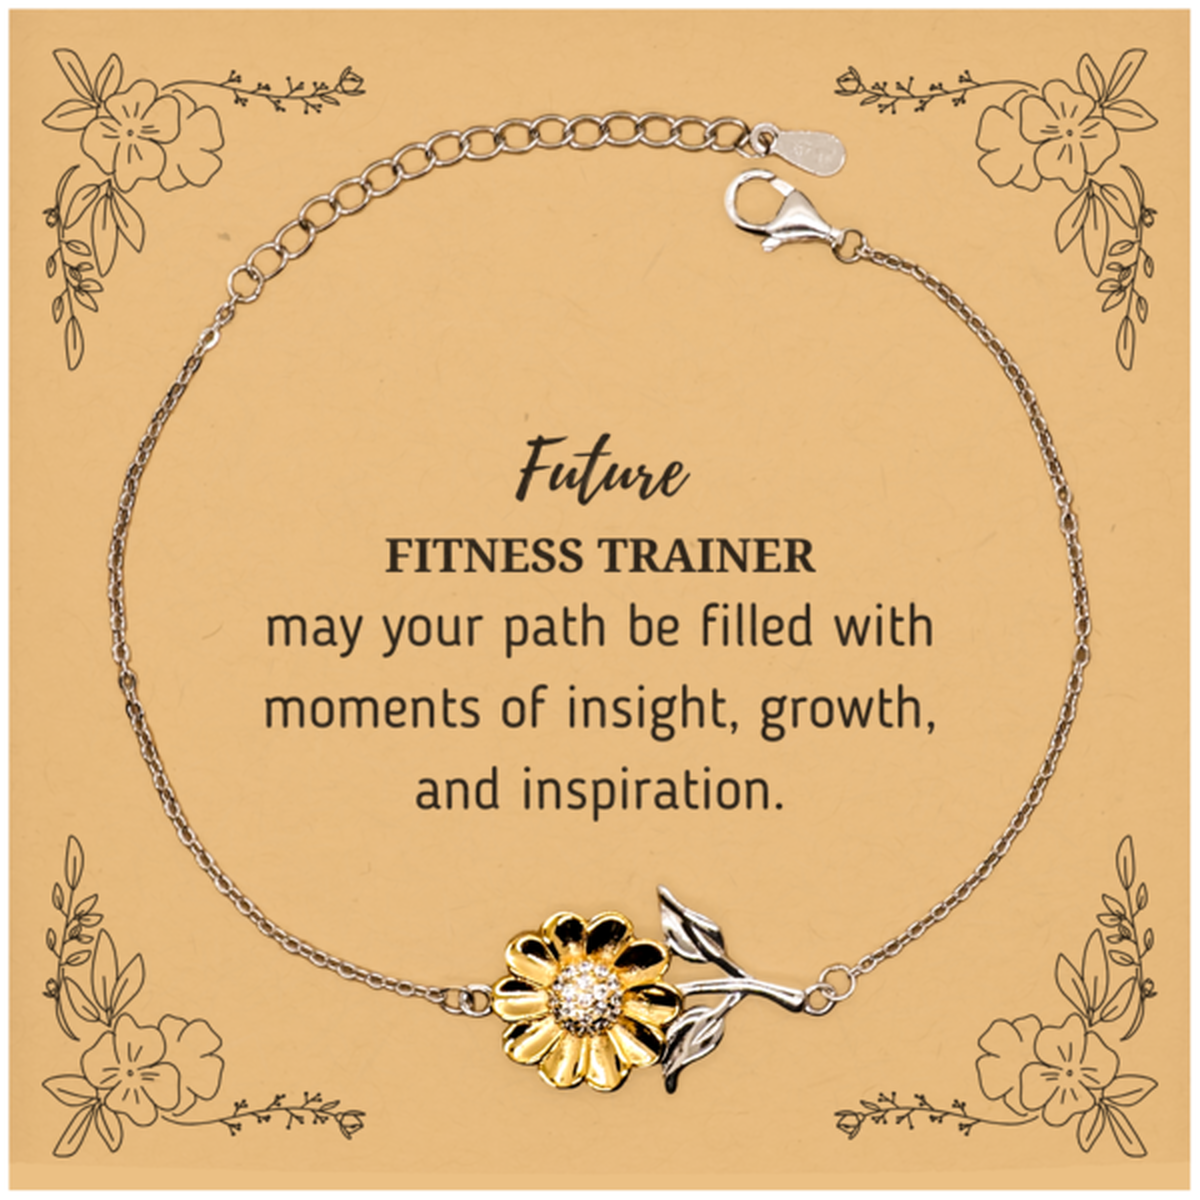 Future Fitness Trainer Gifts, May your path be filled with moments of insight, Graduation Gifts for New Fitness Trainer, Christmas Unique Sunflower Bracelet For Men, Women, Friends